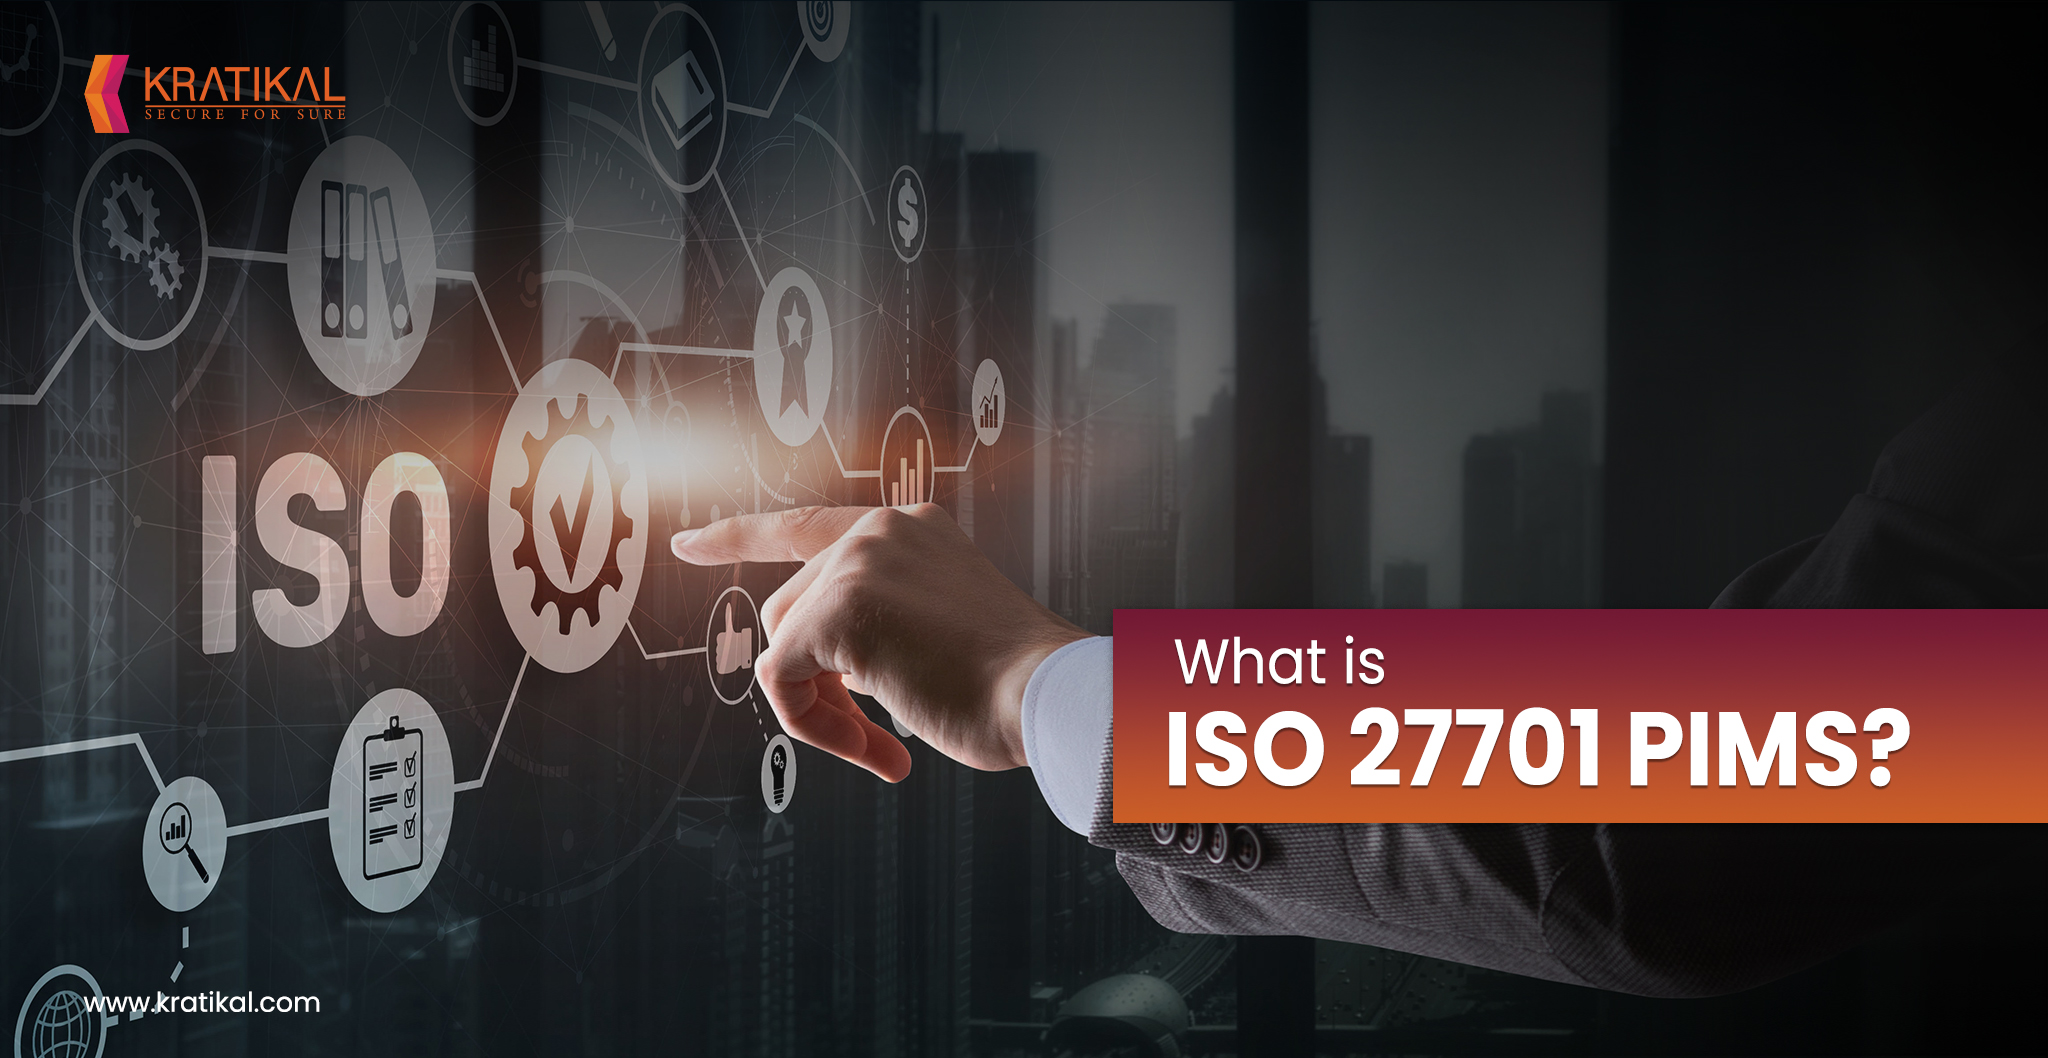 What is ISO 27701 PIMS?